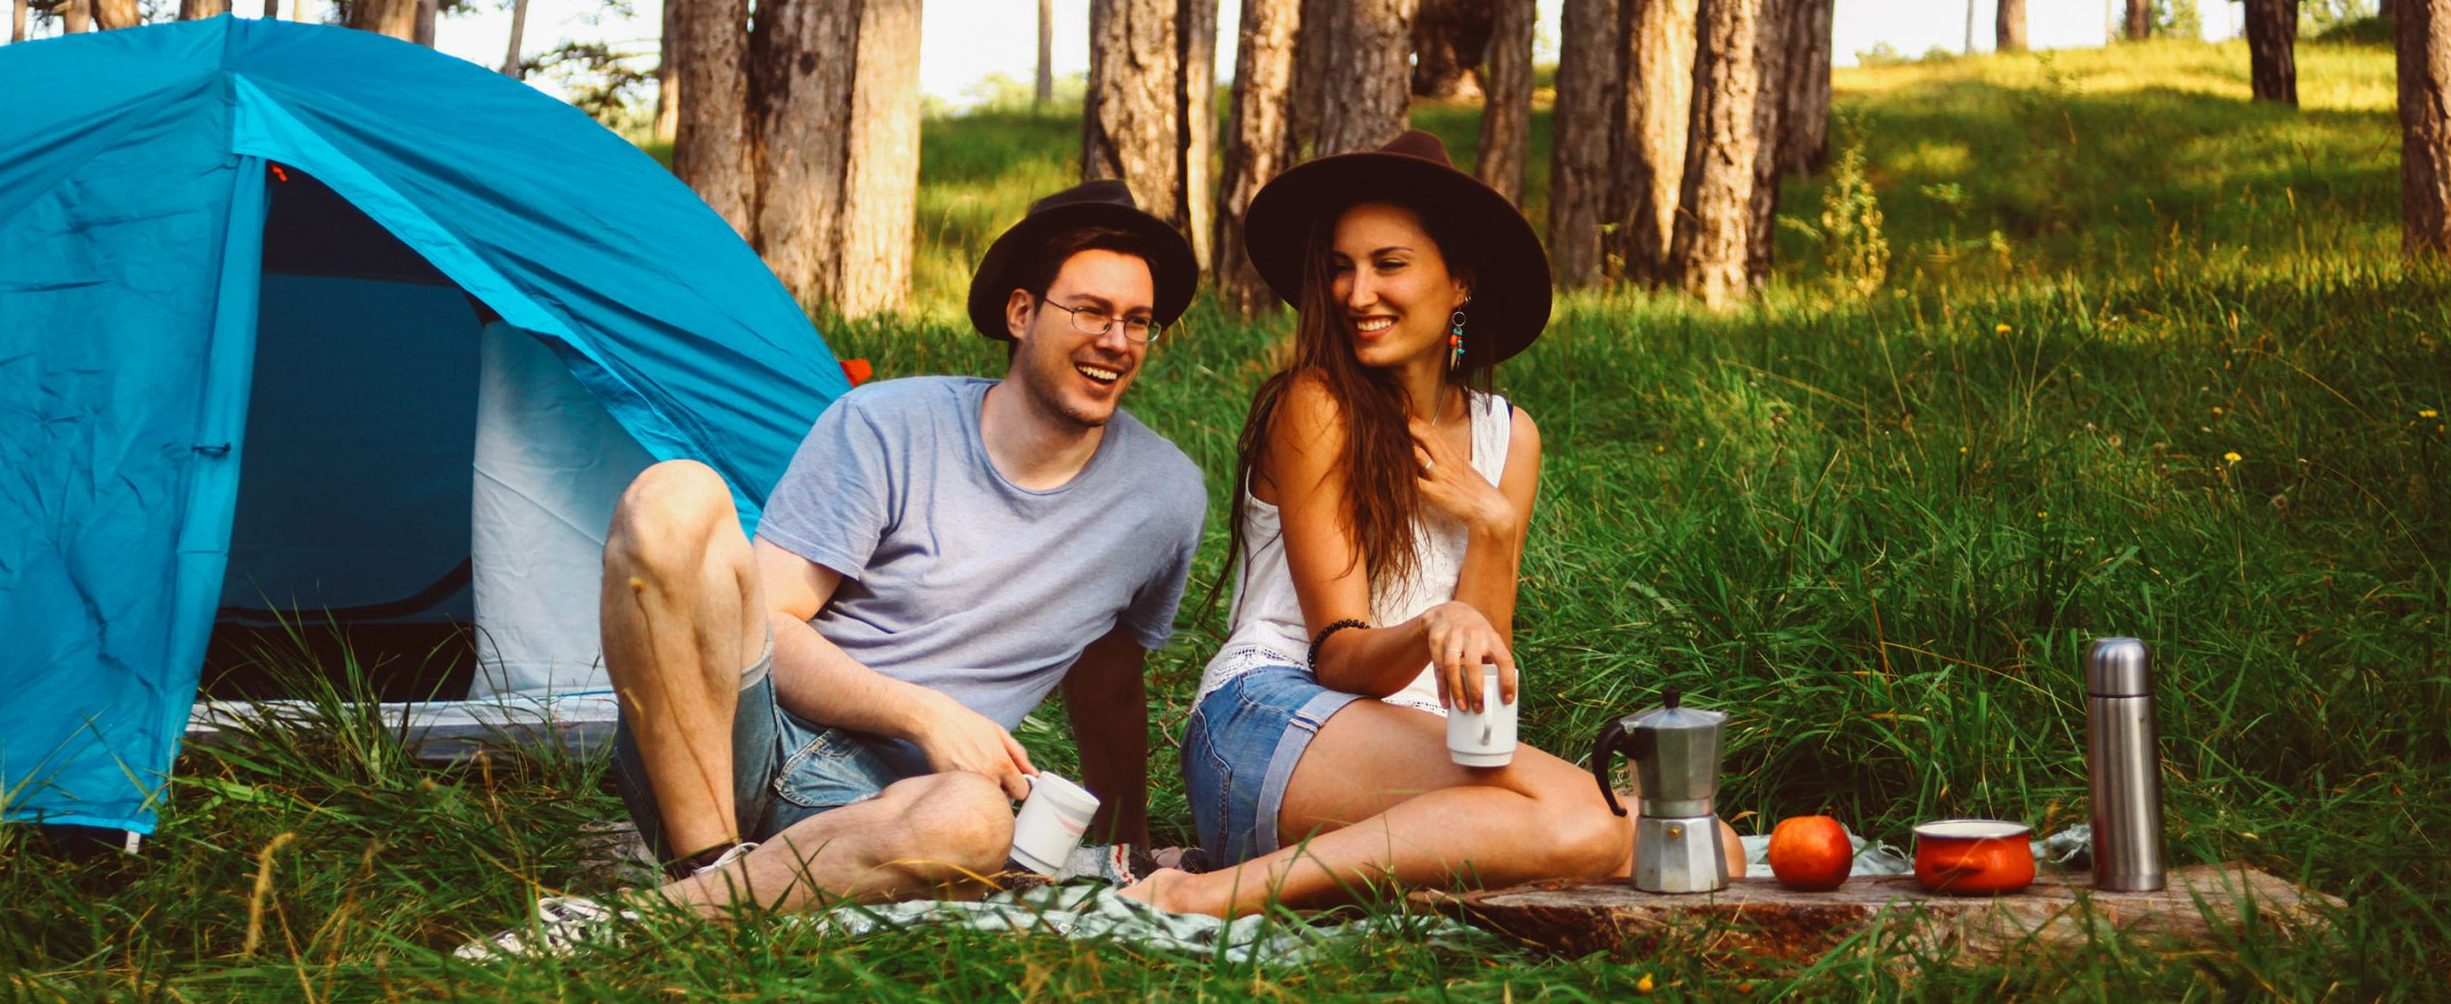 A man and woman hold mugs of coffee and smile while sitting on grass in front of a pitched tent.